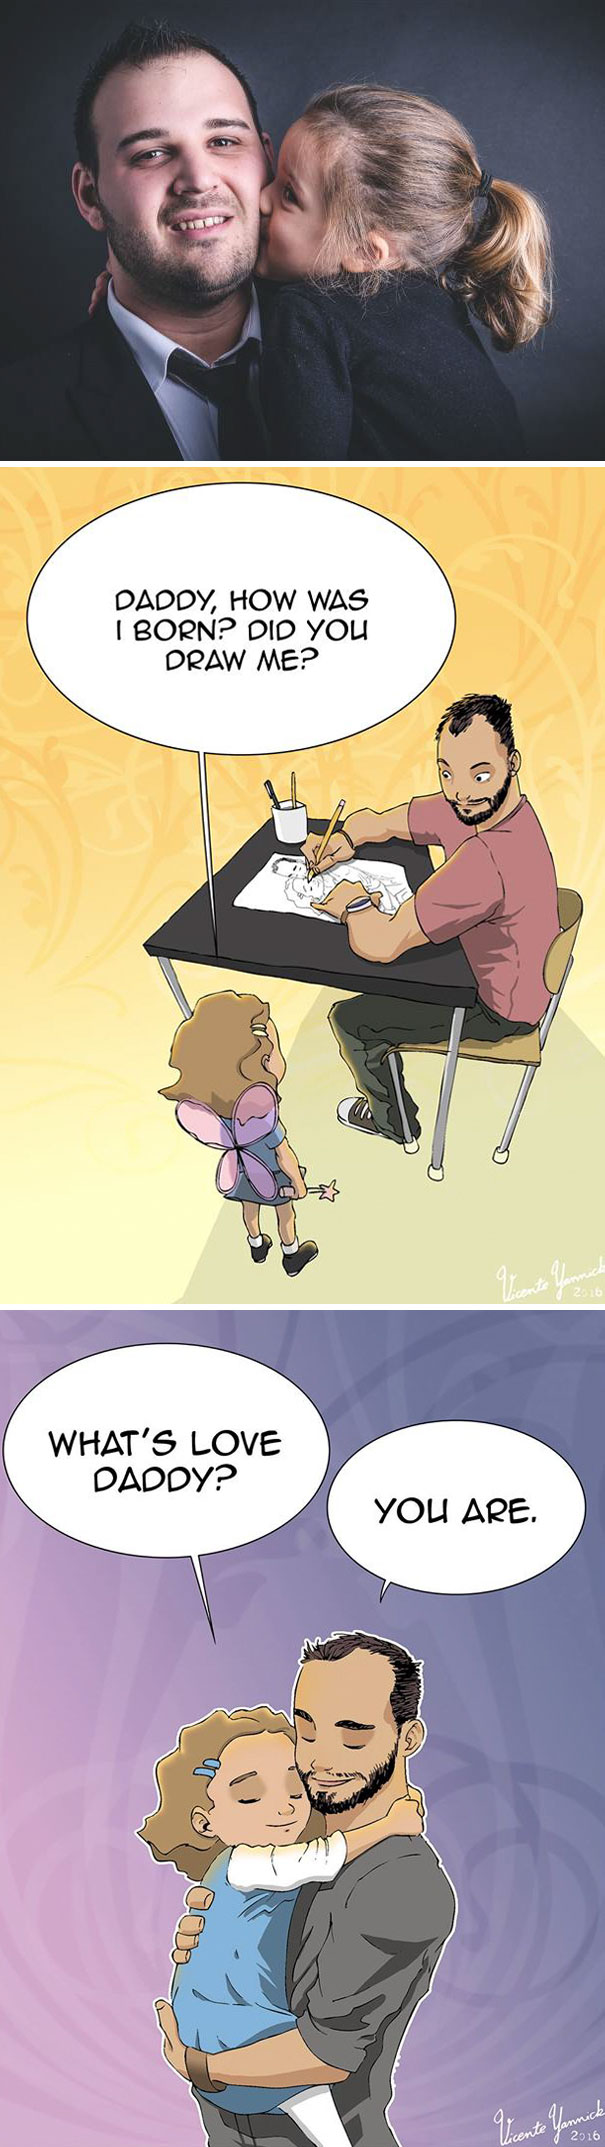 This Single Dad Is Making Heartwarming Illustrations Of Everyday Life With His Daughter